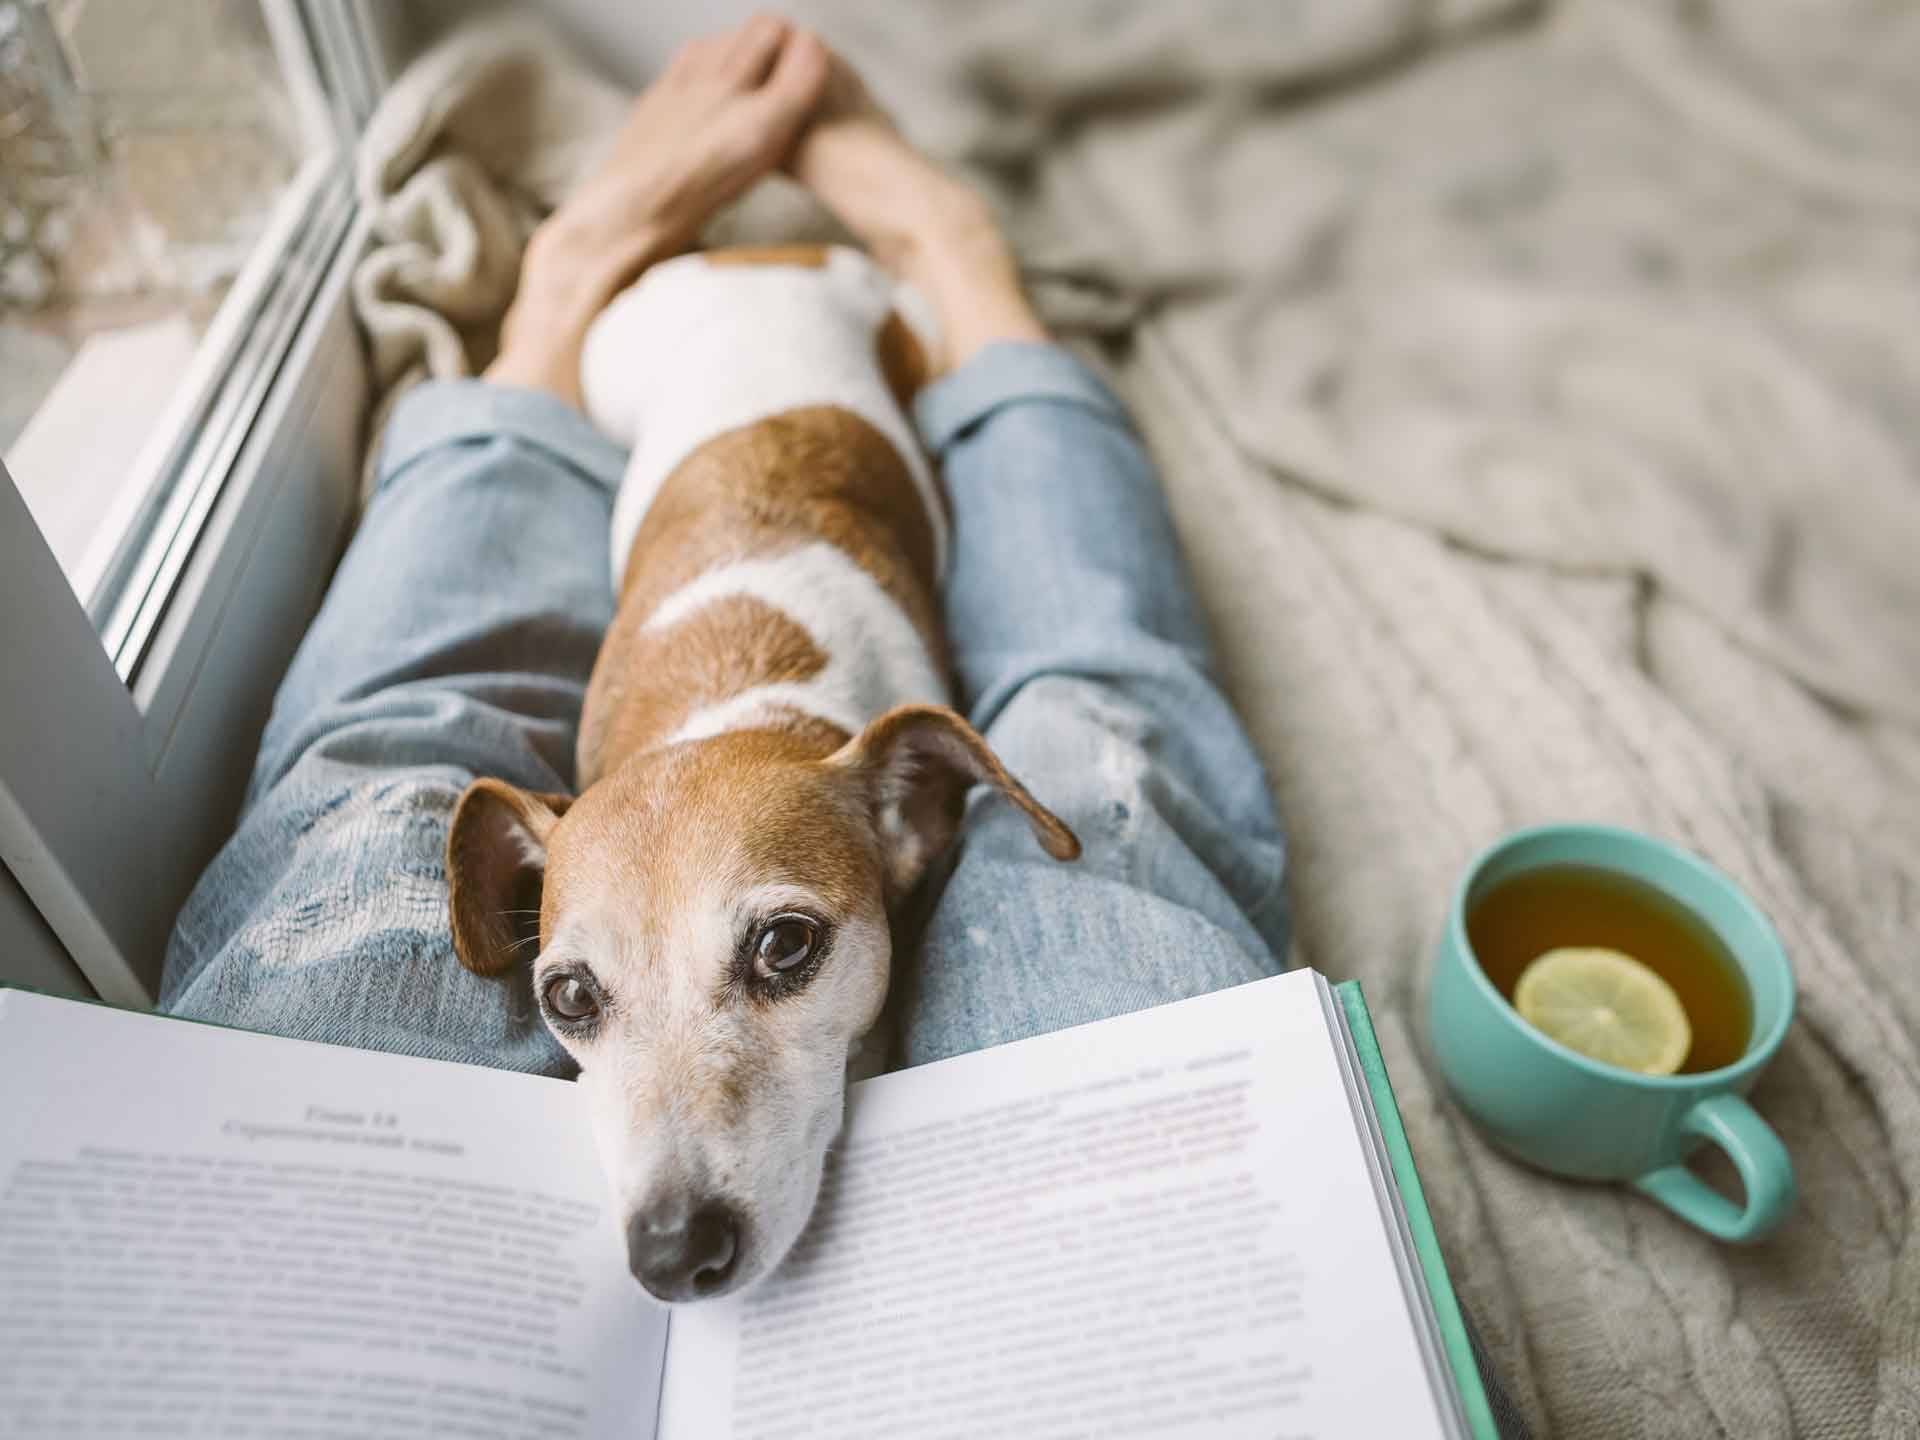 Book on lap of person sitting on bed, Jack Russell Terrier lying on legs, teacup at their side